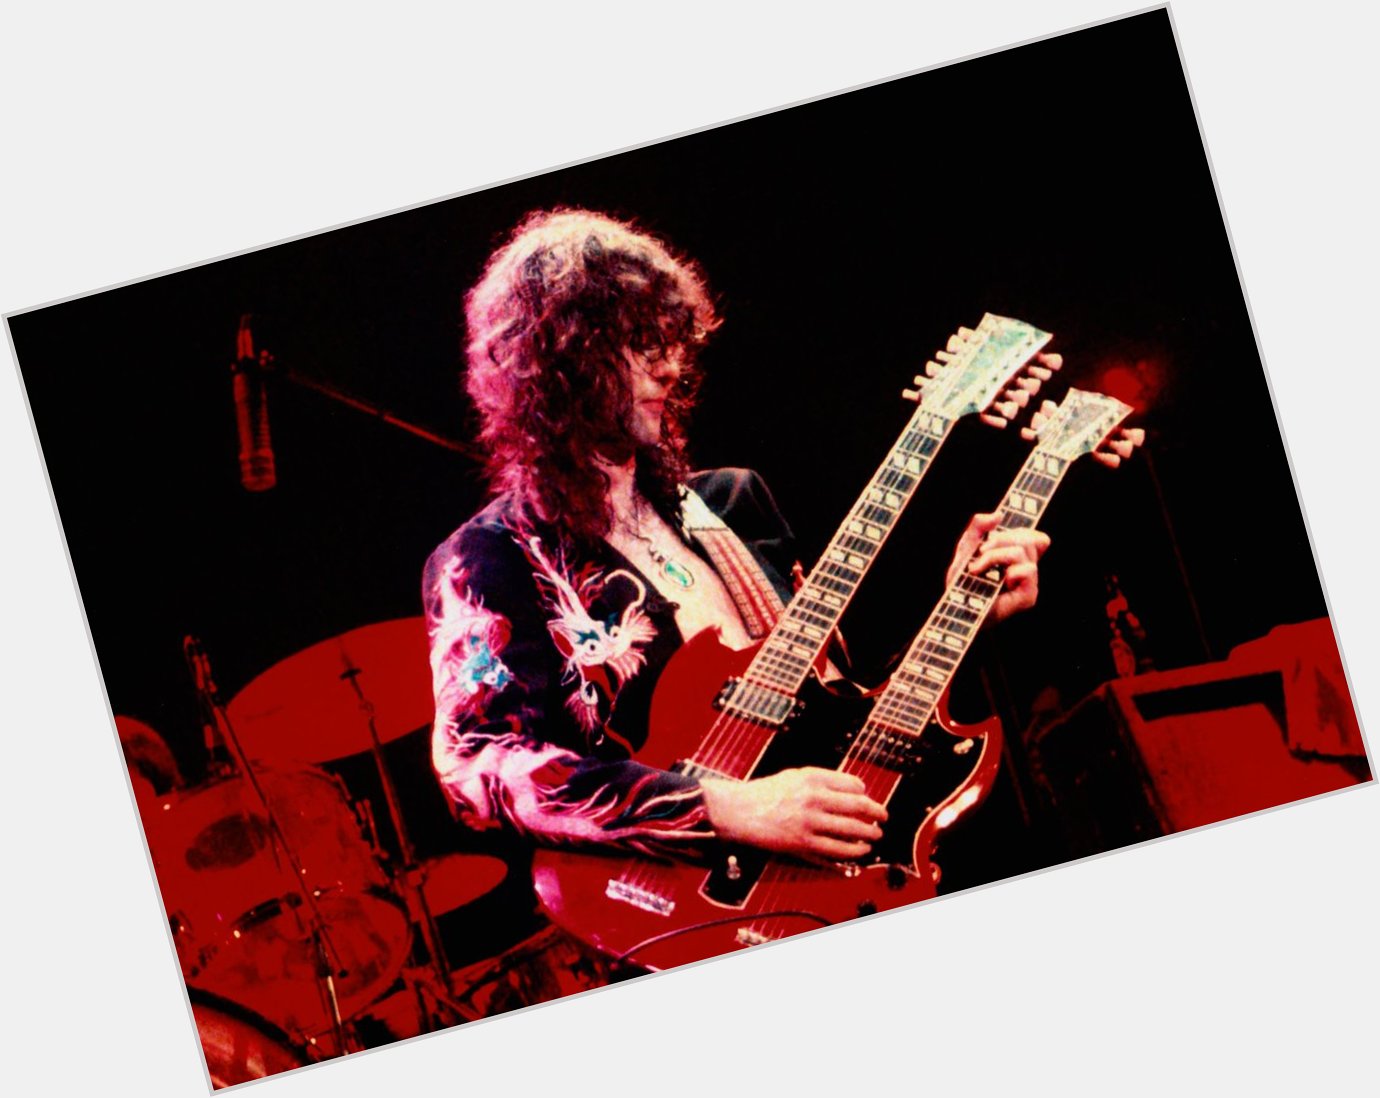 Happy Birthday to Jimmy Page who turns 77 today 